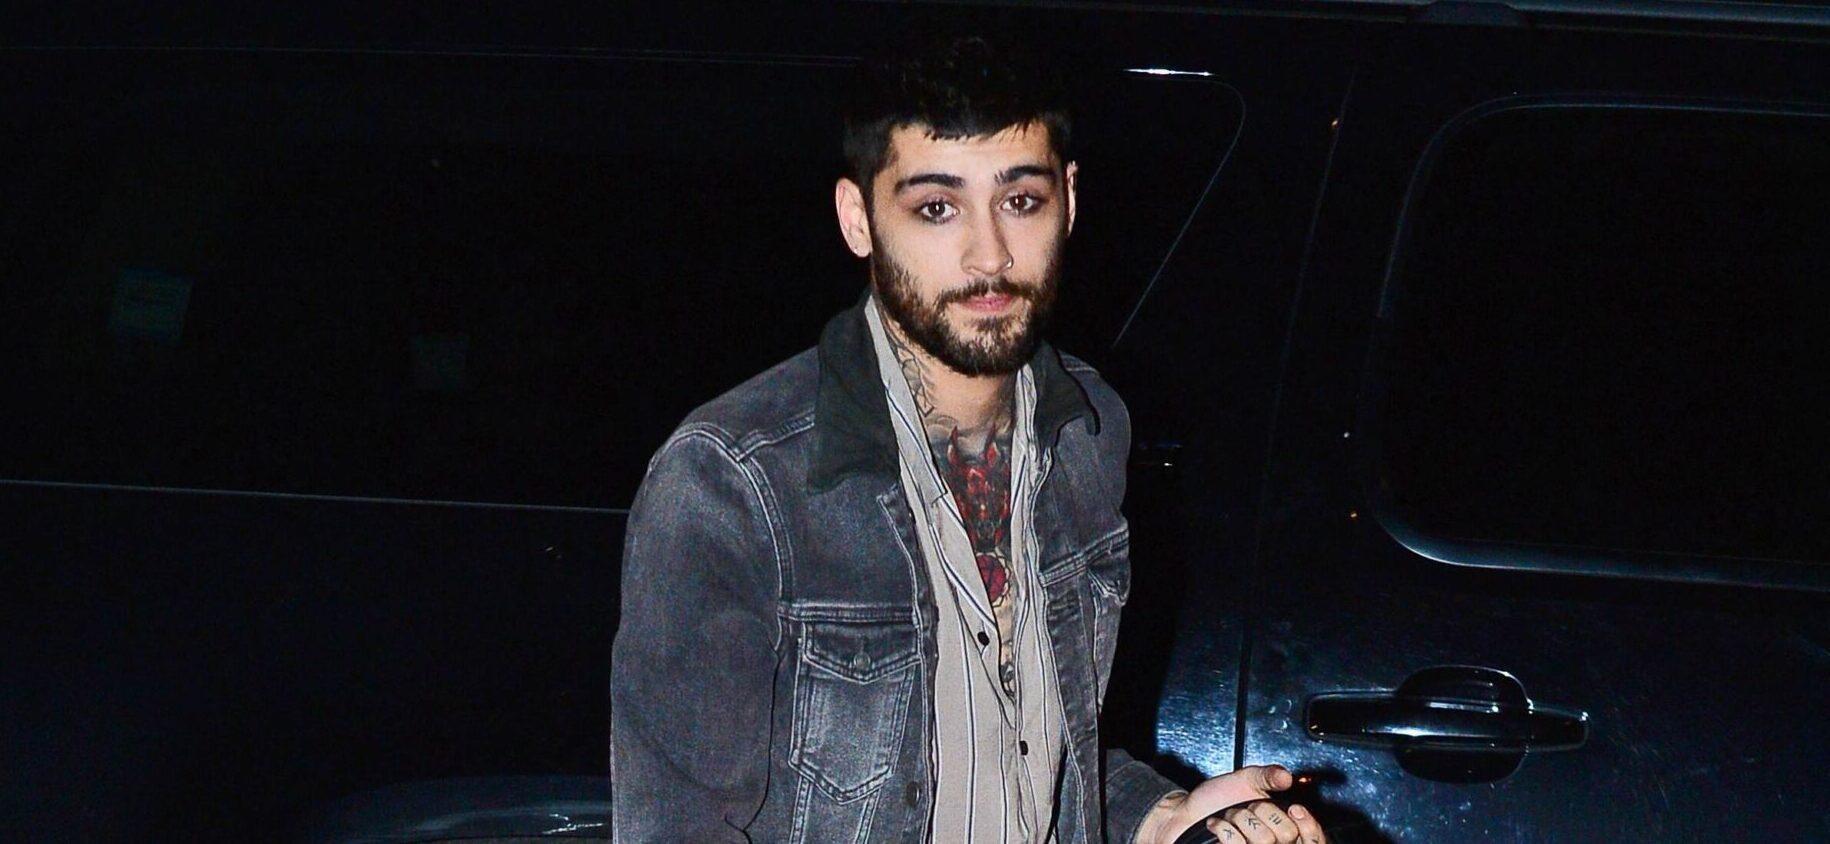 Zayn Malik Is ‘Not In The Dating Game’ Amid Interests From Women, Says Mother